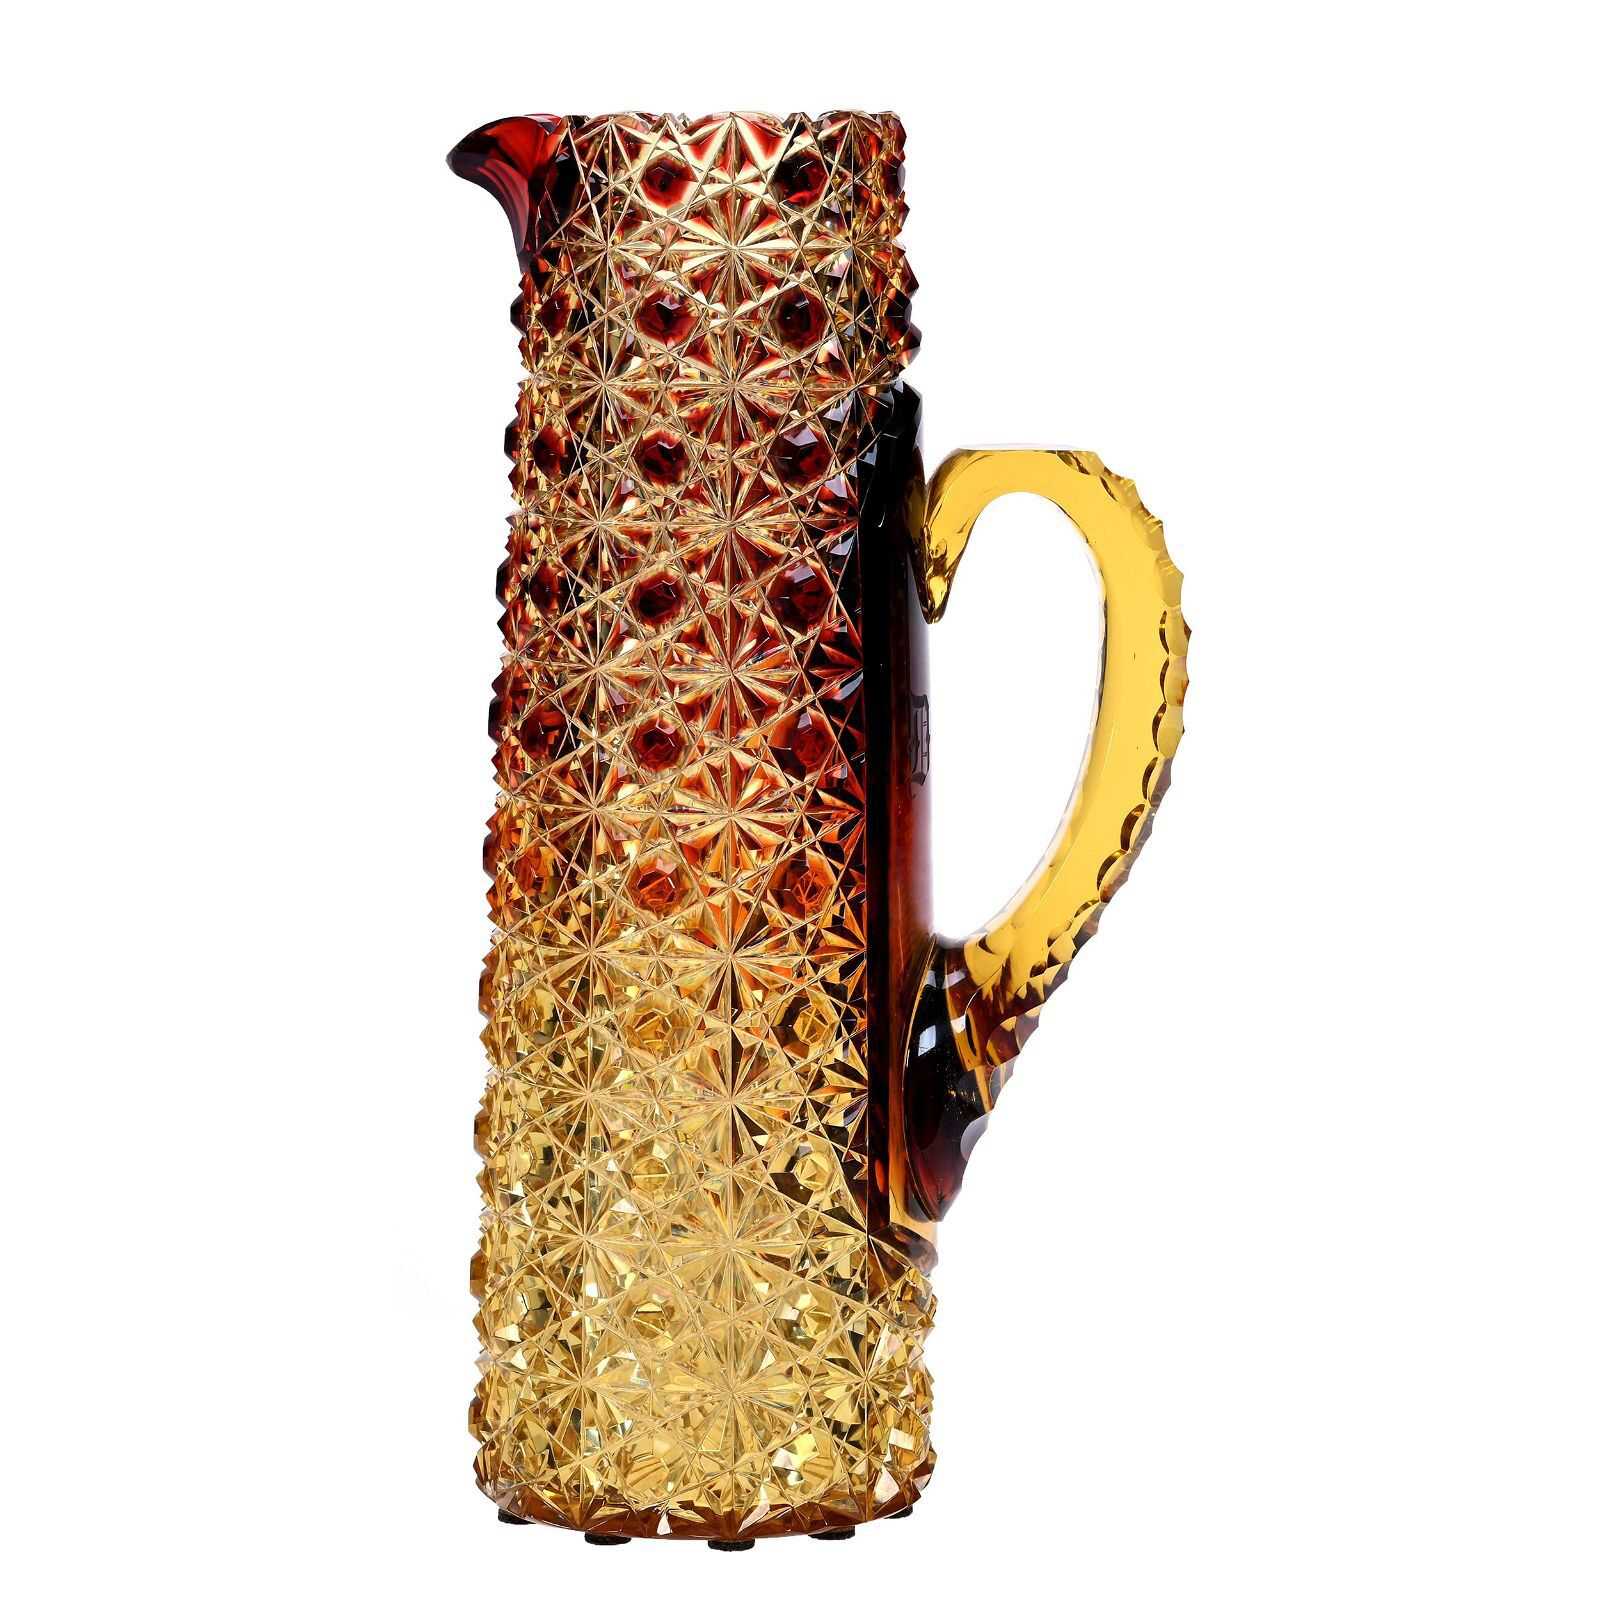 Late 19 th-century amberina tankard made by Libbey Cut Glass, estimated at $20,000-$25,000 at Woody Auction May 18.